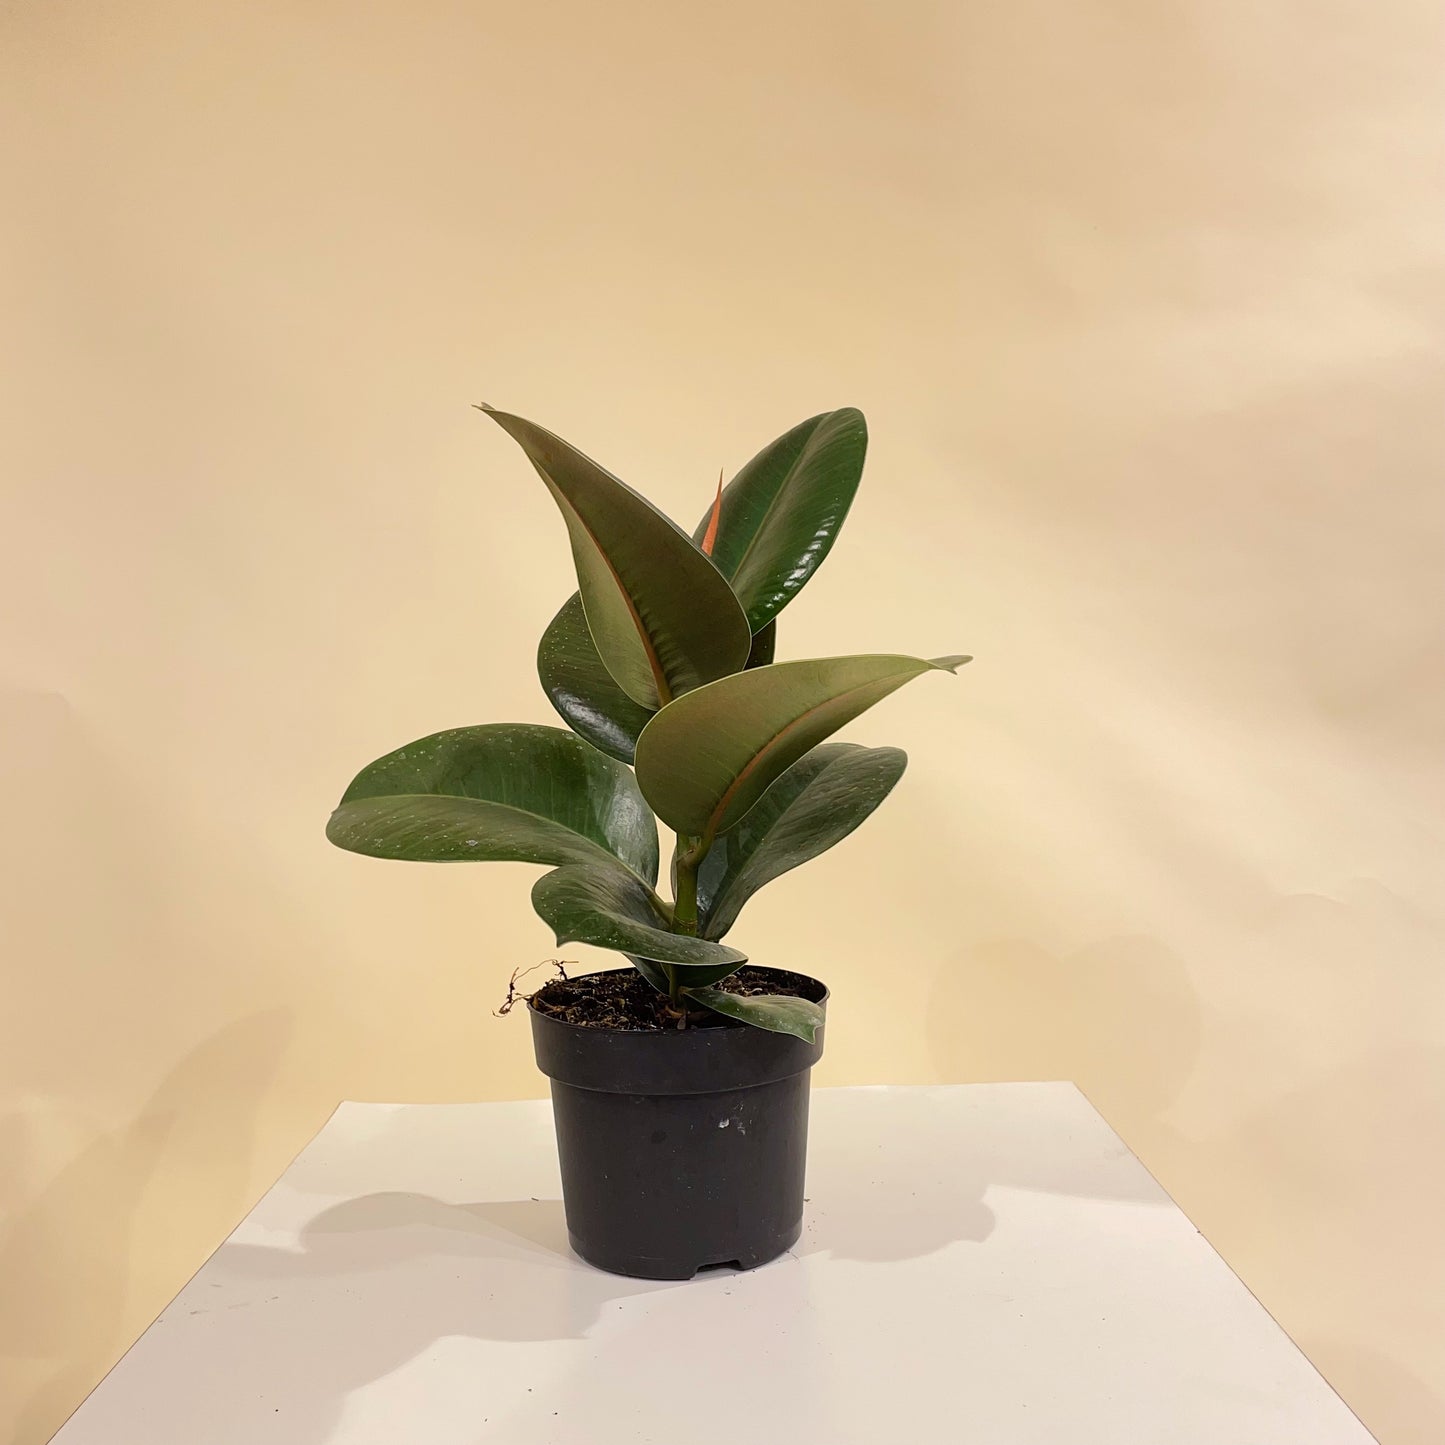 Green Rubber Plant (Ficus elastica) in a 5 inch pot. Indoor plant for sale by Promise Supply for delivery and pickup in Toronto